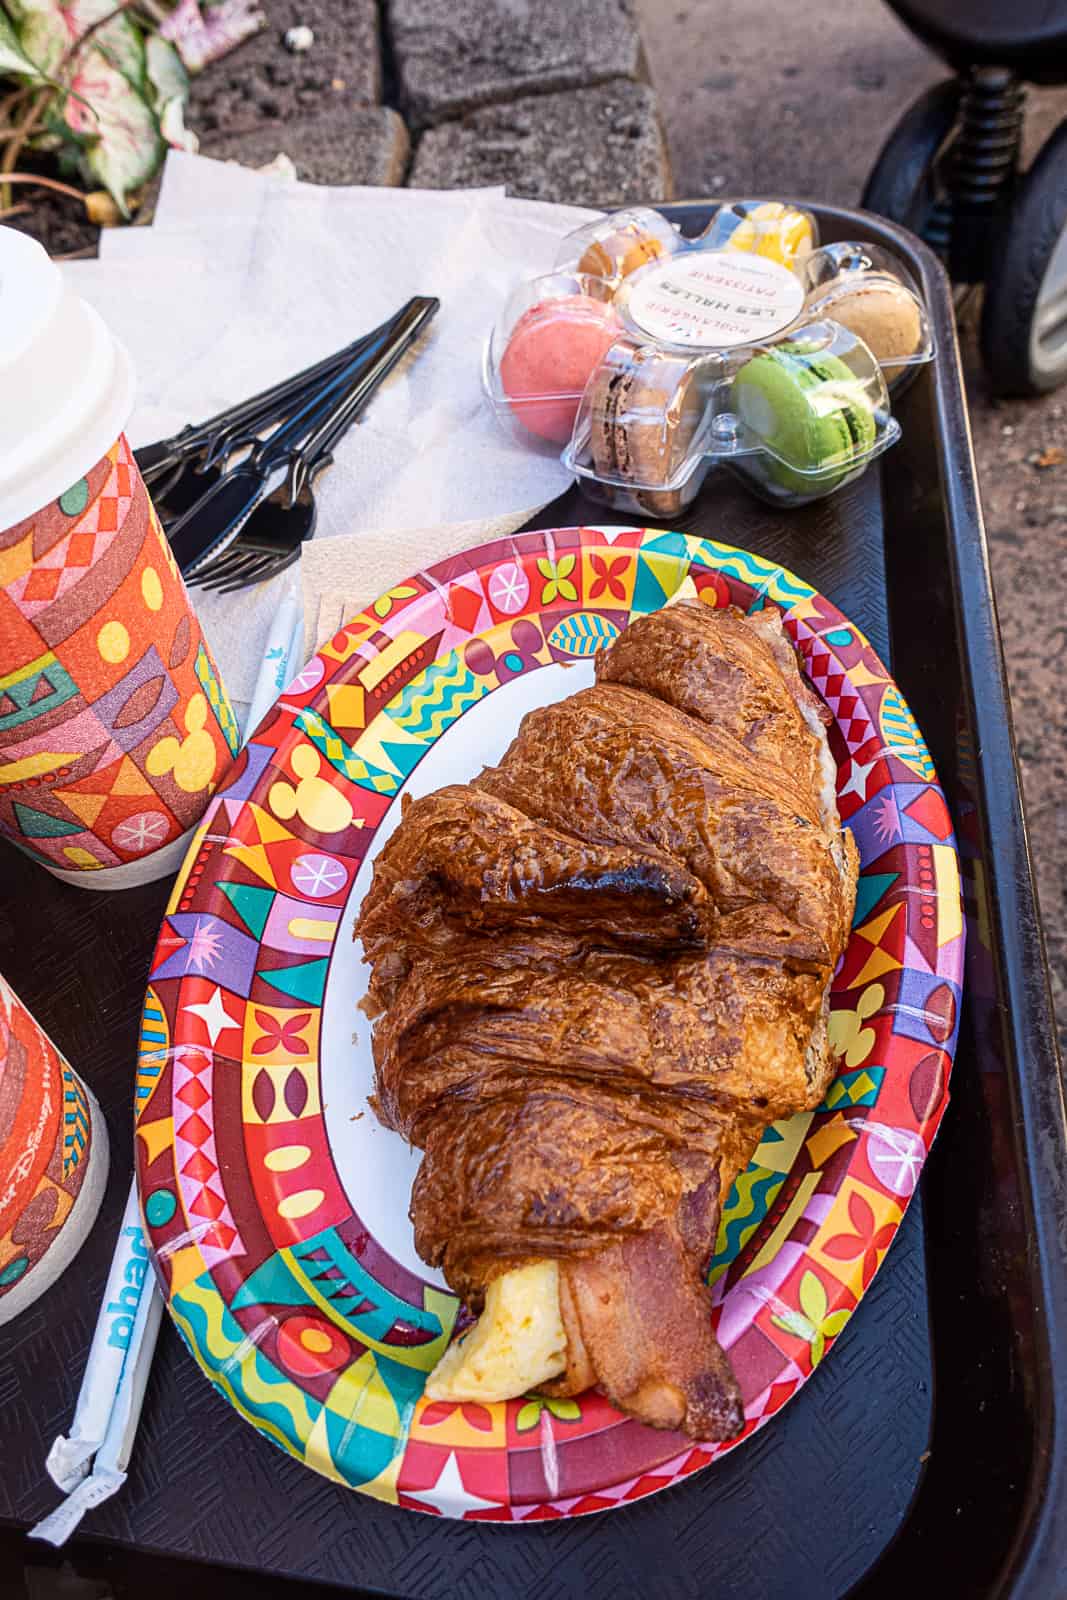 Croissant Egg Sandwich from the Les Halles Quick Service Breakfast Menu in Epcot France